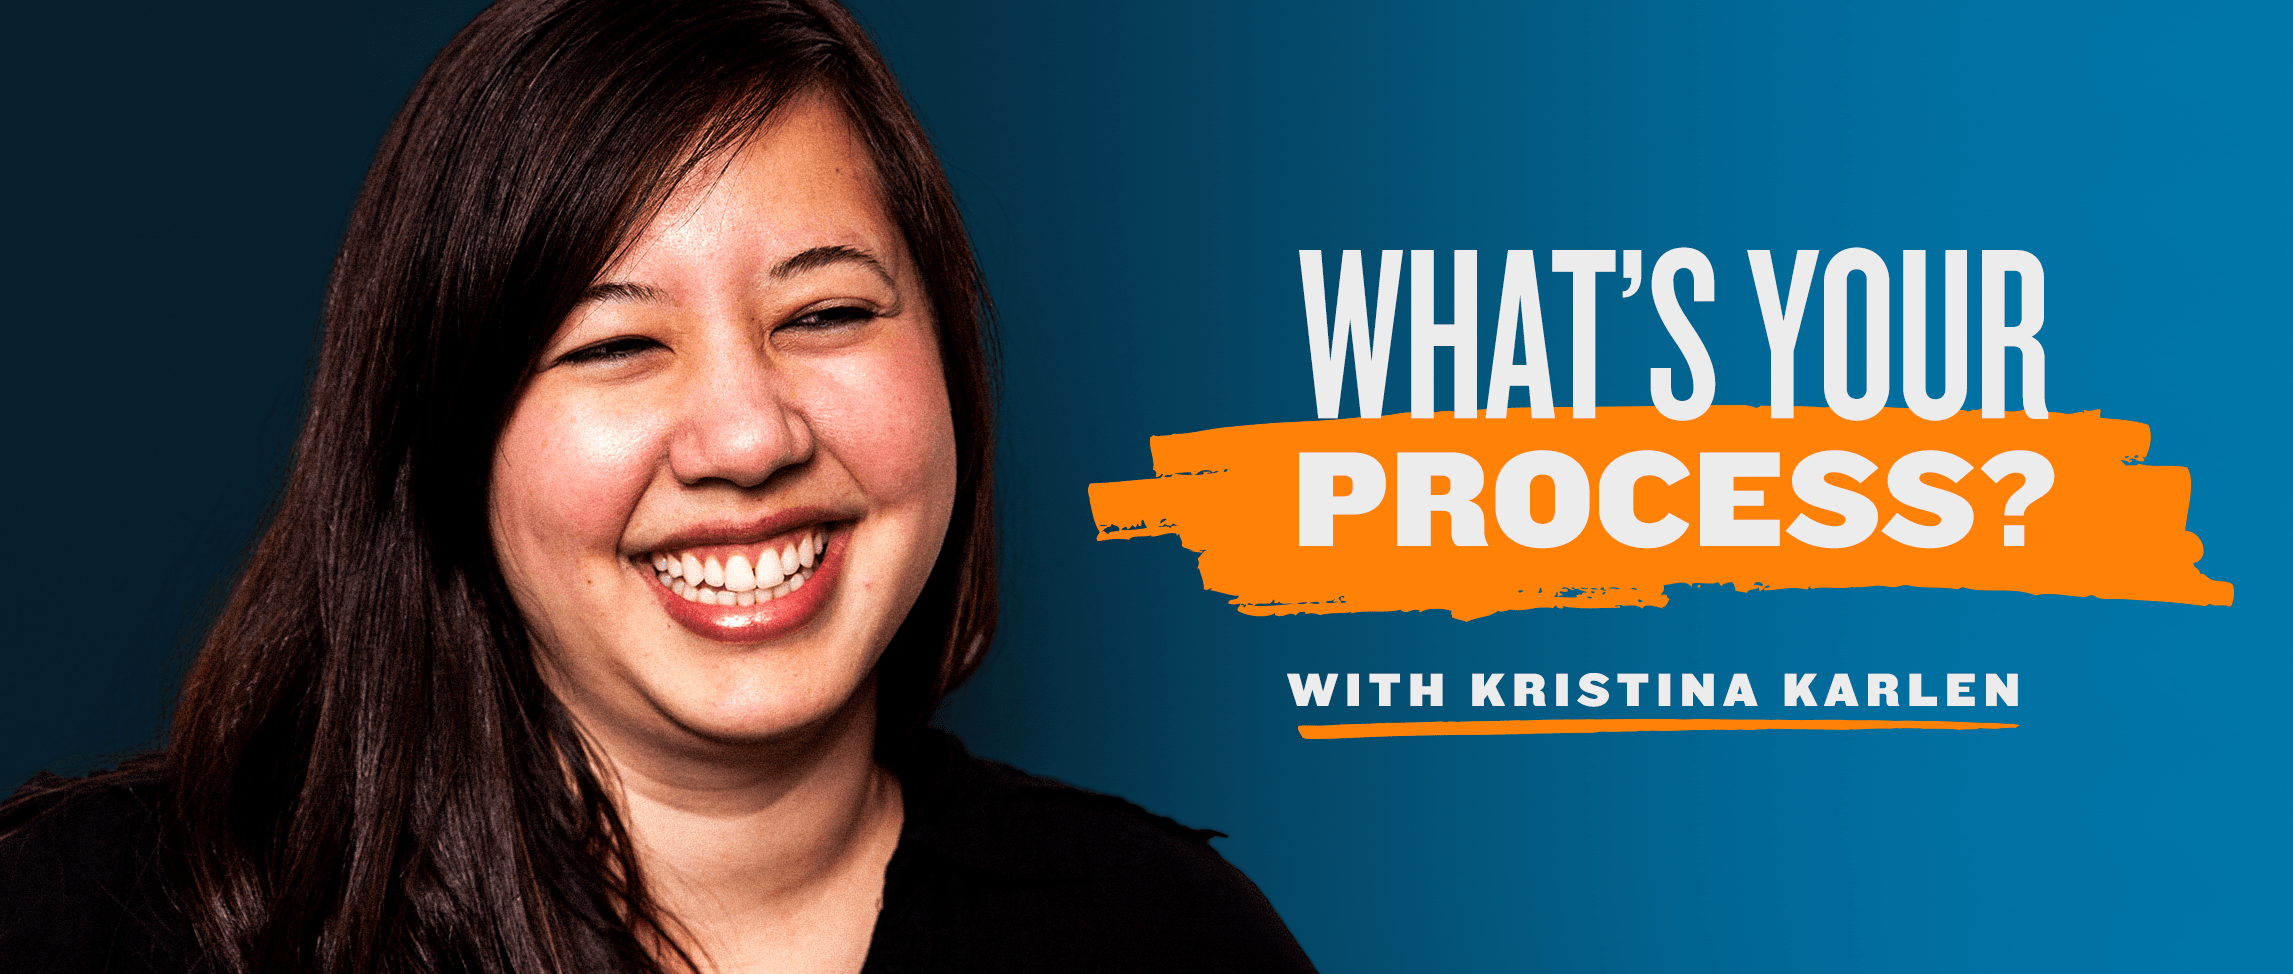 What's Your Process? Q&A with Kristina Karlen